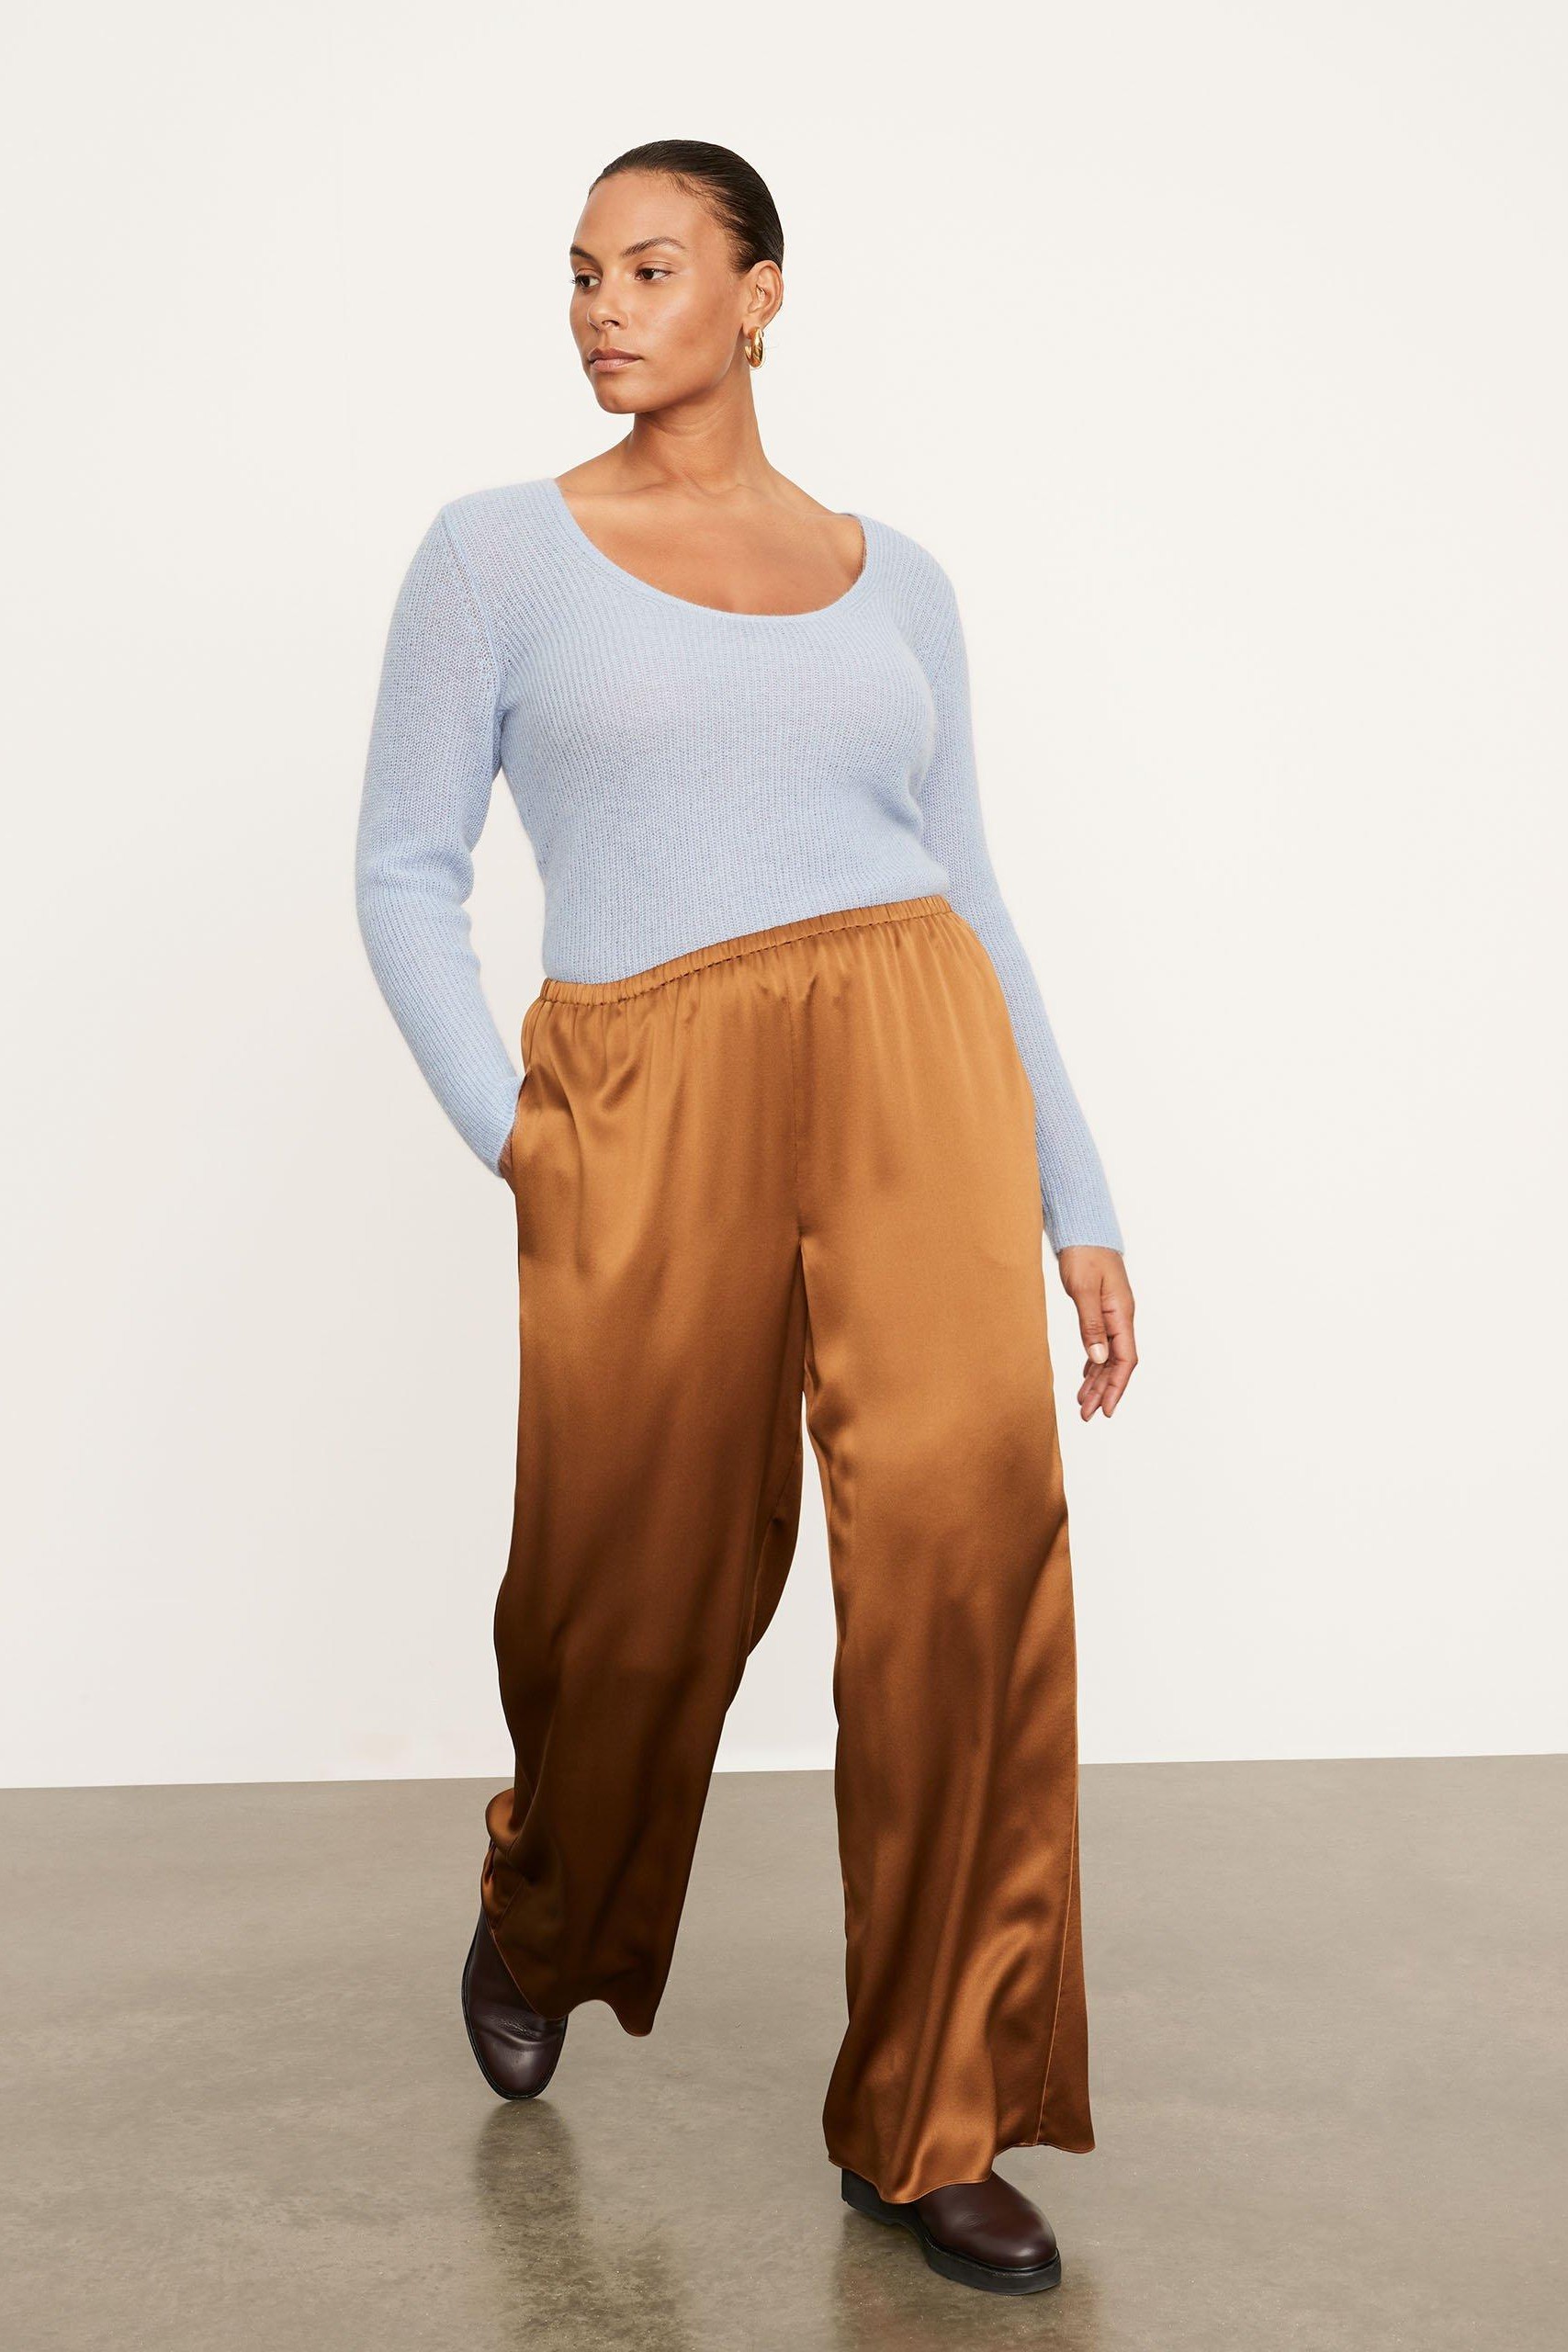 The 19 Best Work Pants for Women in 2023